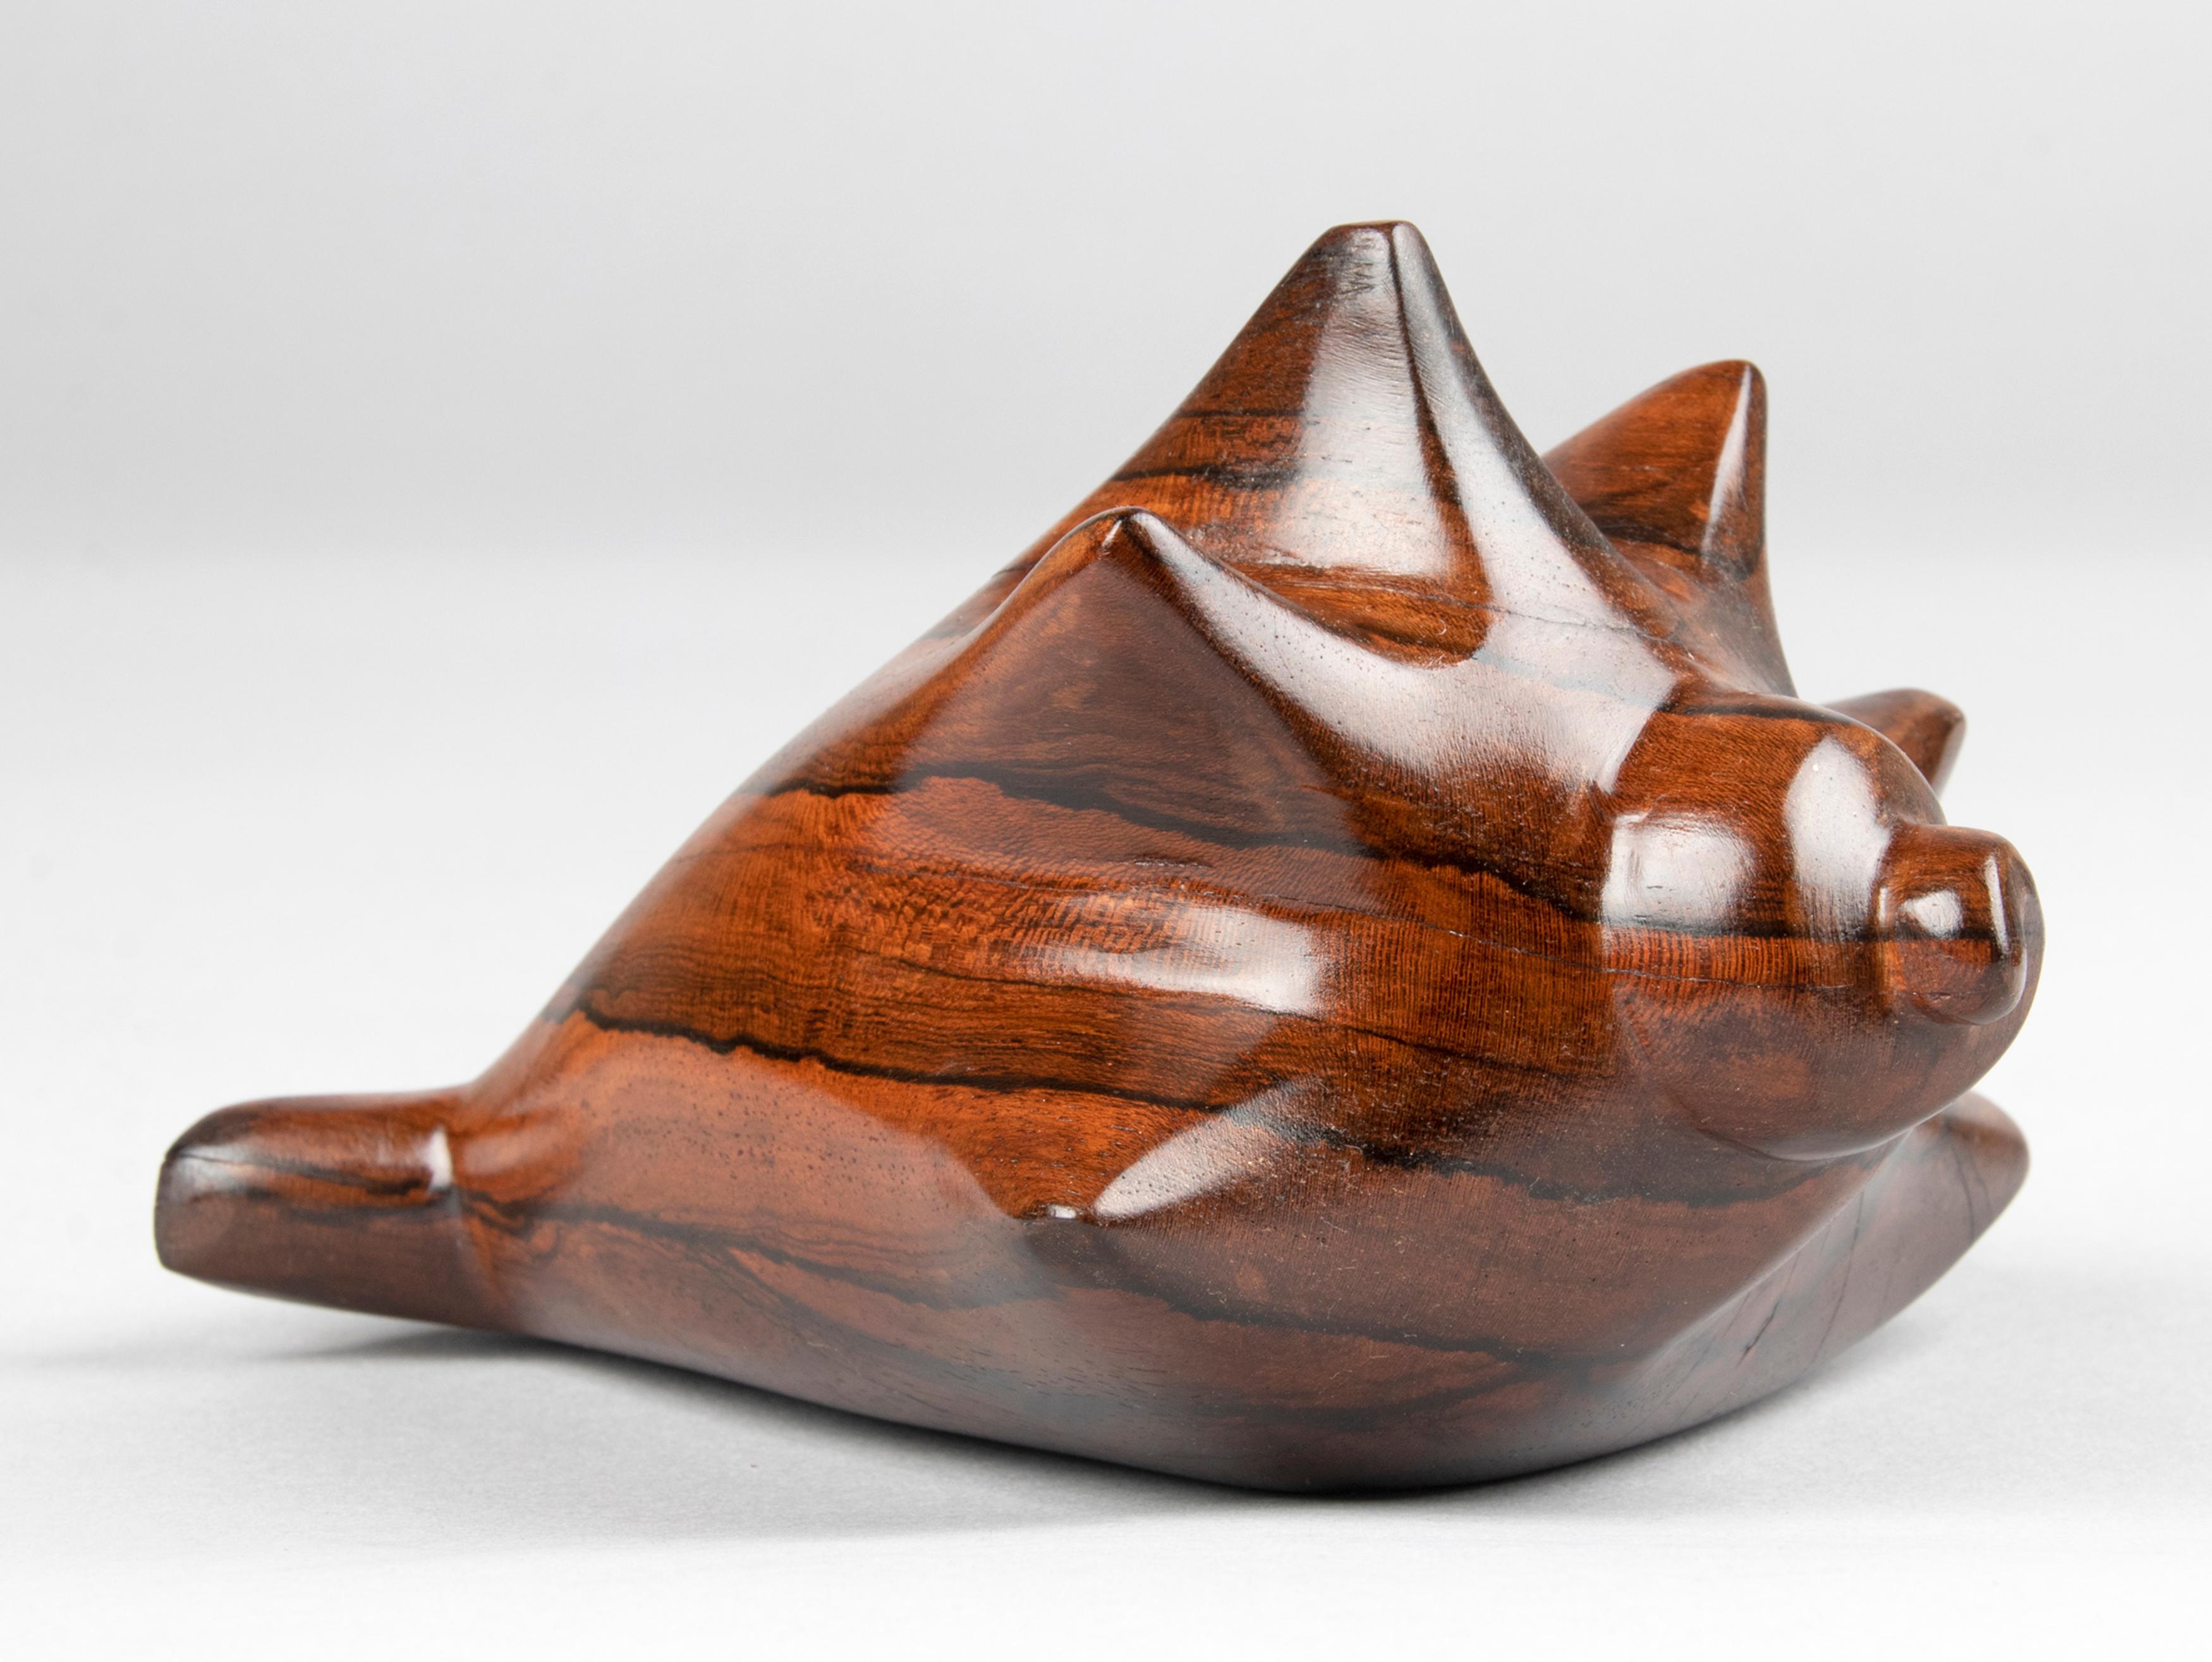 Mid-20th Century Mid-Century Modern Wooden Sculpture Shaped as a Shell For Sale